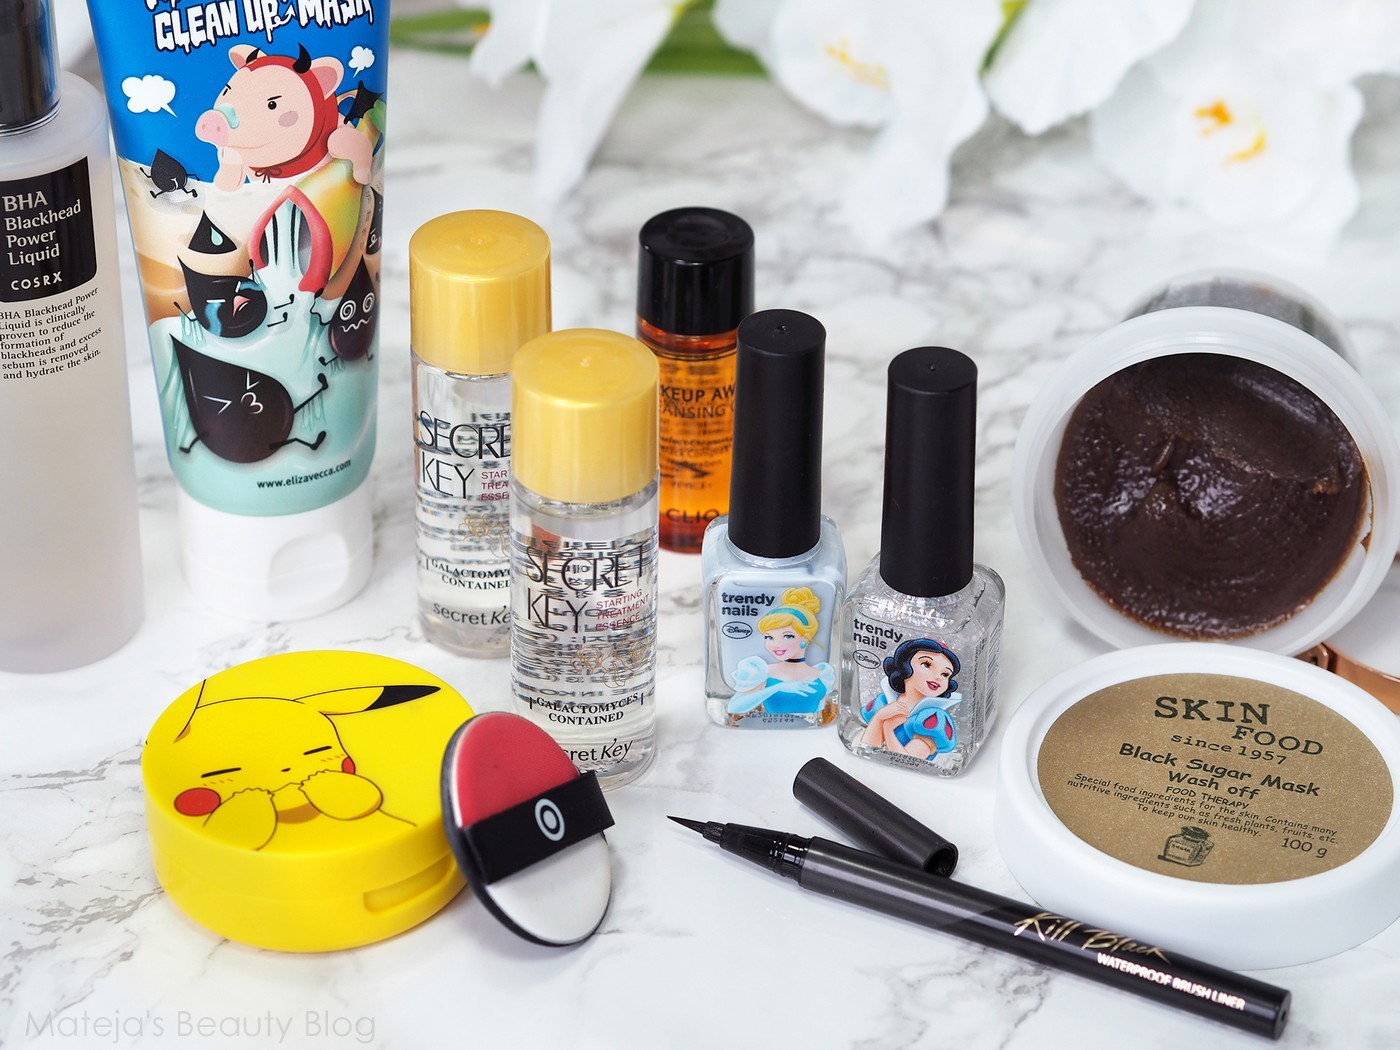 New in: Asian Beauty Part 1 - Makeup & Skincare